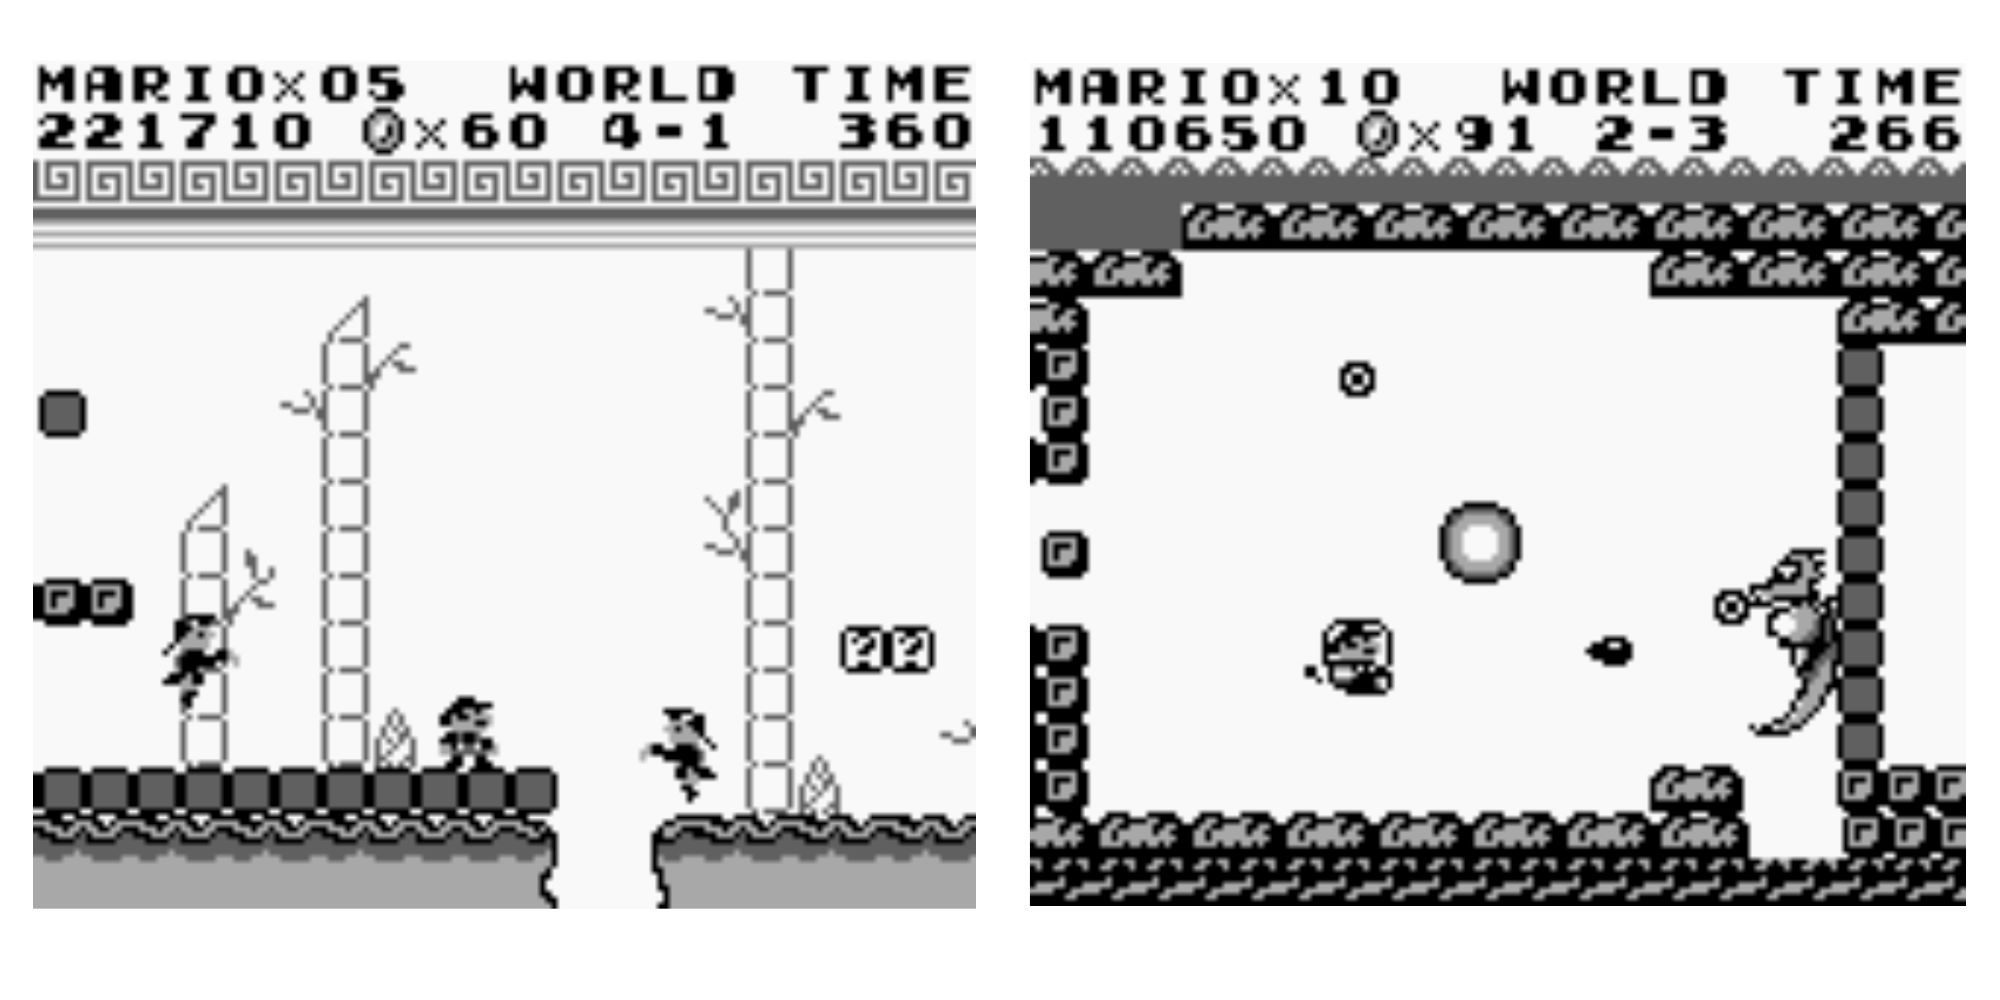 2 Super Mario Land Screen Shots: Left - Mario in World 4 fighting Chinese vampires, Right - Mario in a Submarine fighting a giant Sea Horse 